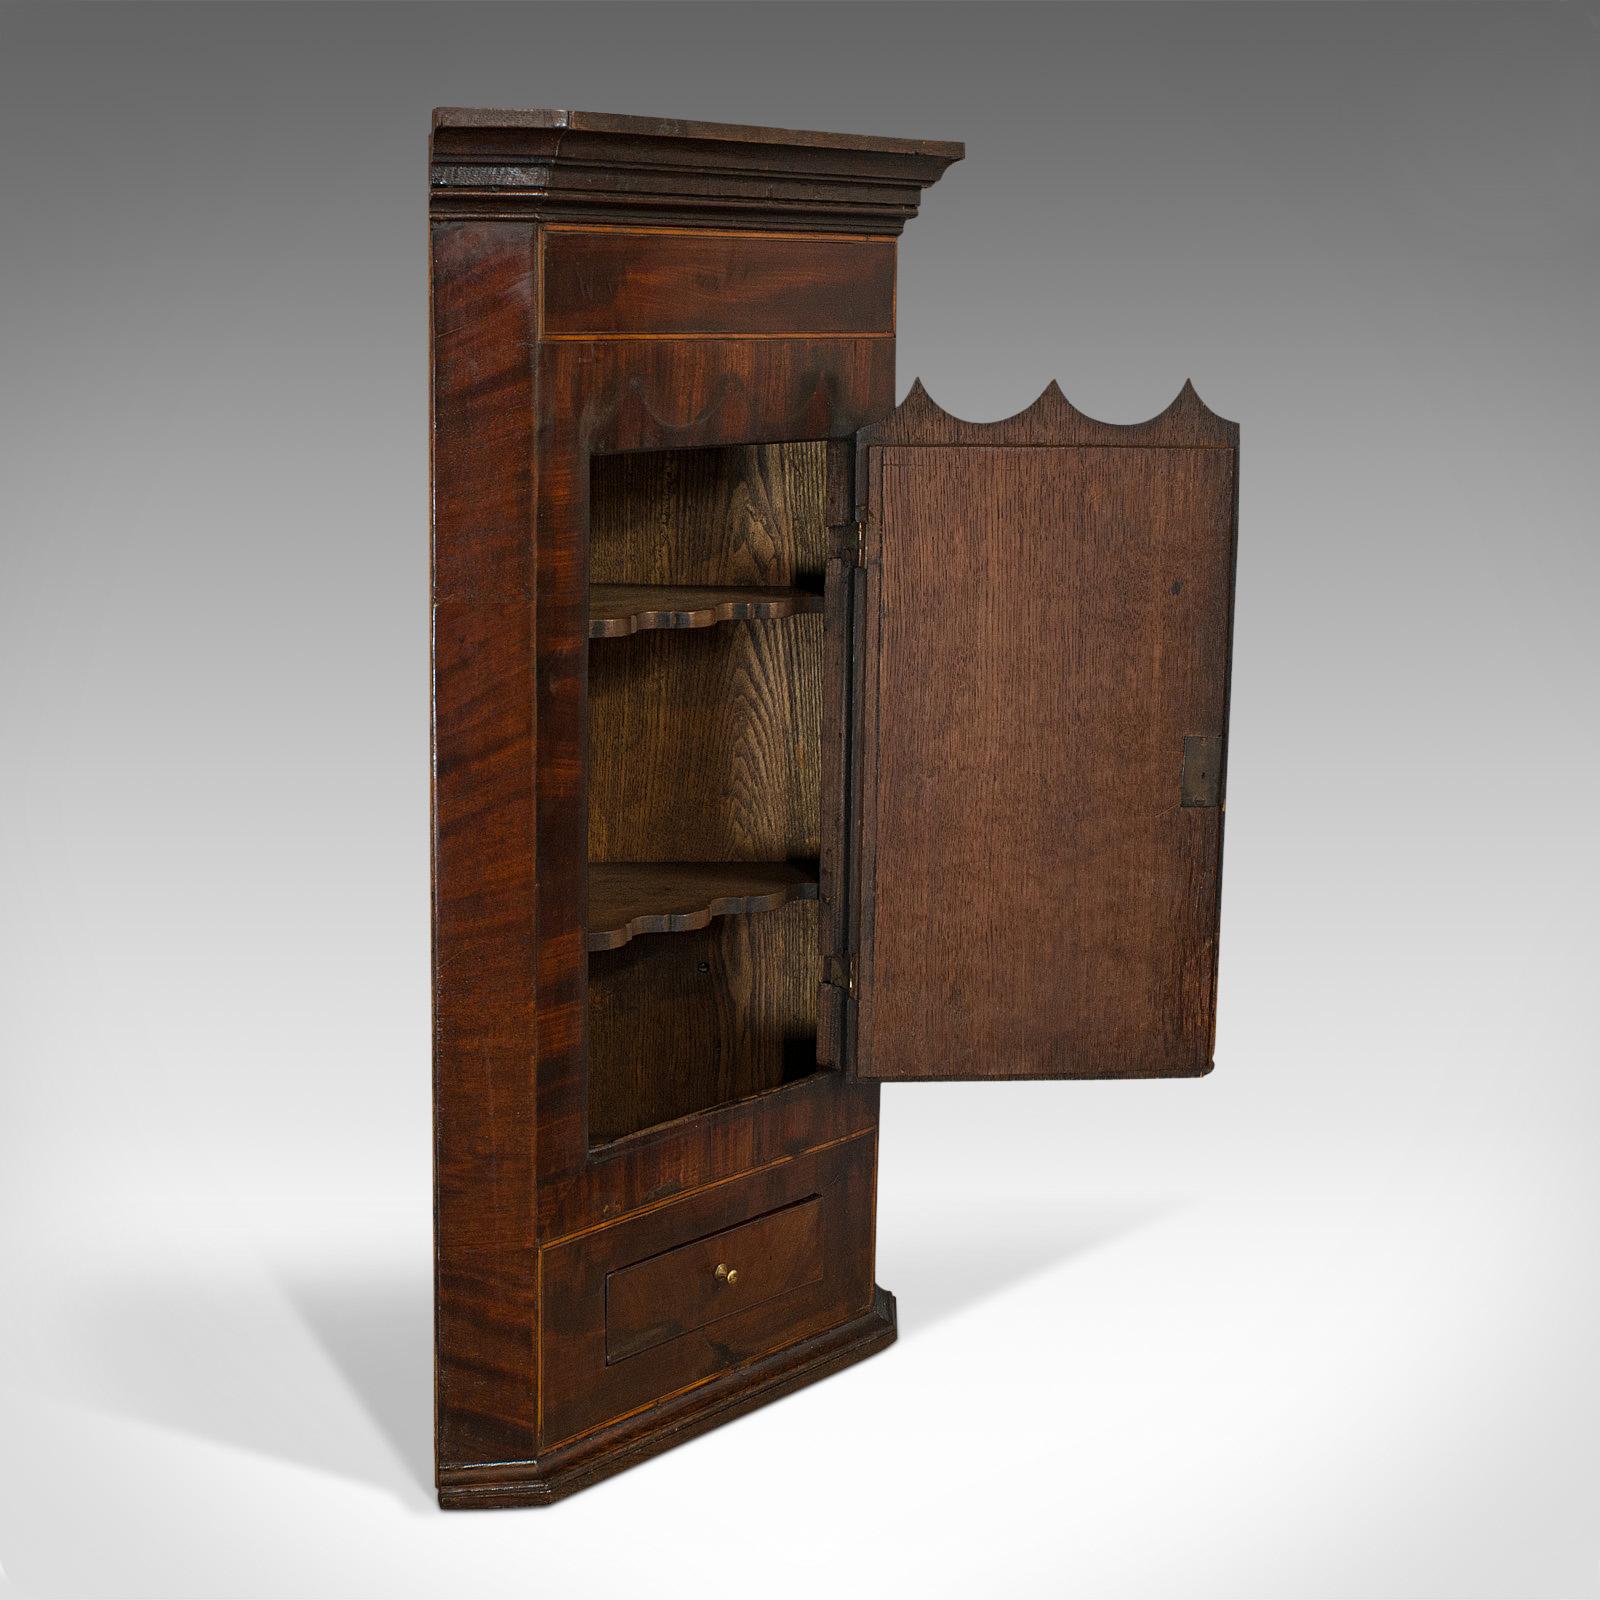 This is an antique corner cabinet. An English, oak and mahogany wall-hanging Georgian cupboard, dating to the late 18th century, circa 1800.

Wonderful Georgian cabinet with delightfully small proportions
Displays a desirable aged patina
Oak and